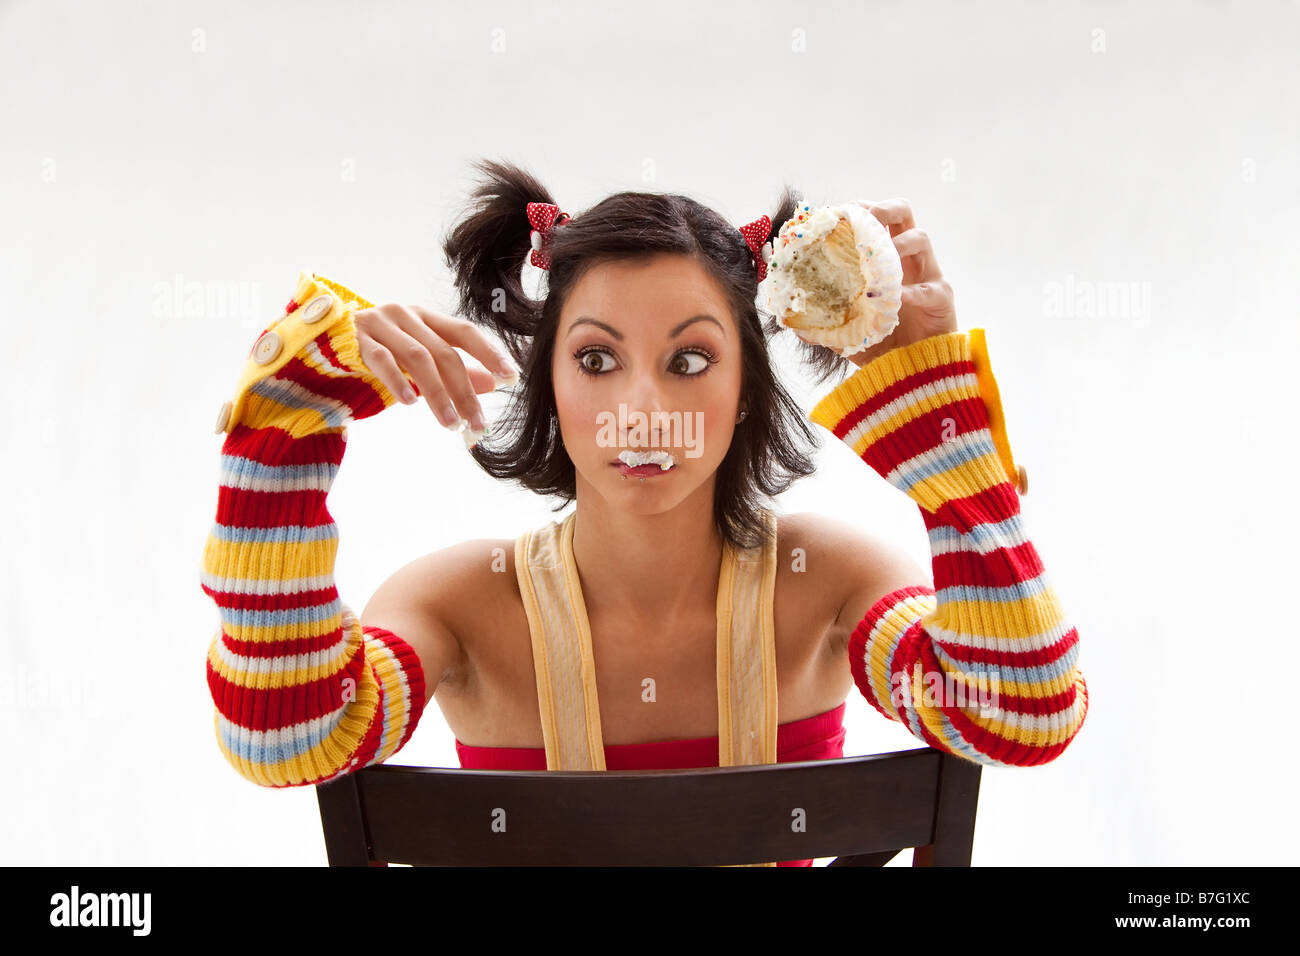 Beautiful Latina girl eating a cupcake with her fingers looking cross eyed isolated Stock Photo